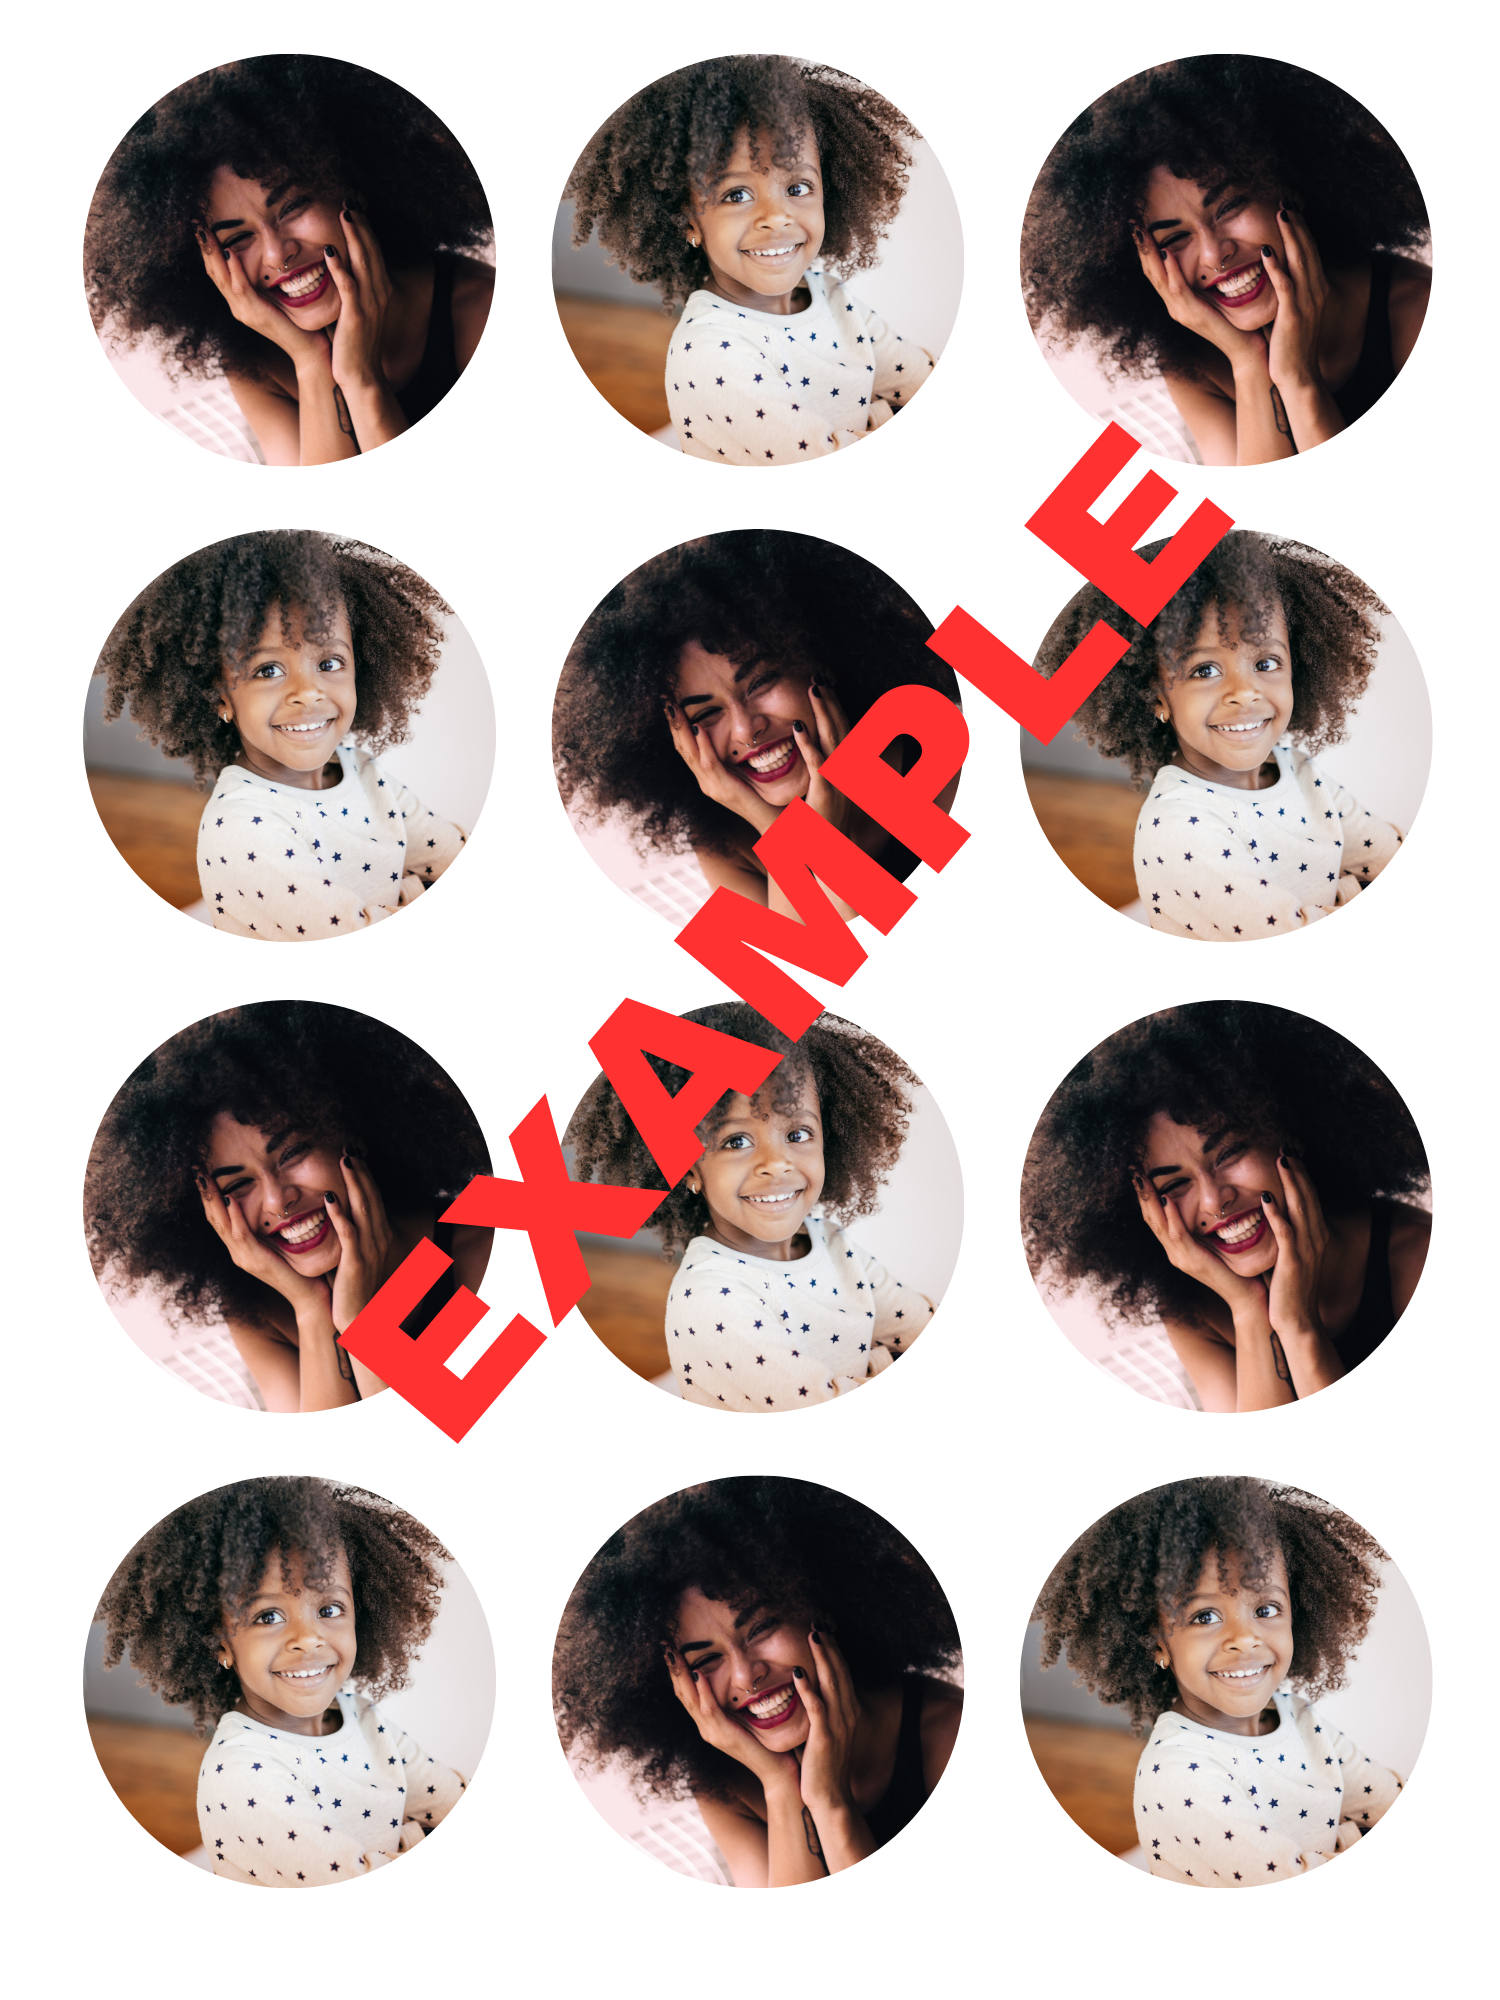 Your own Image Personalised Edible Printed Cupcake Toppers Icing Sheet of 12 ( 2 images )